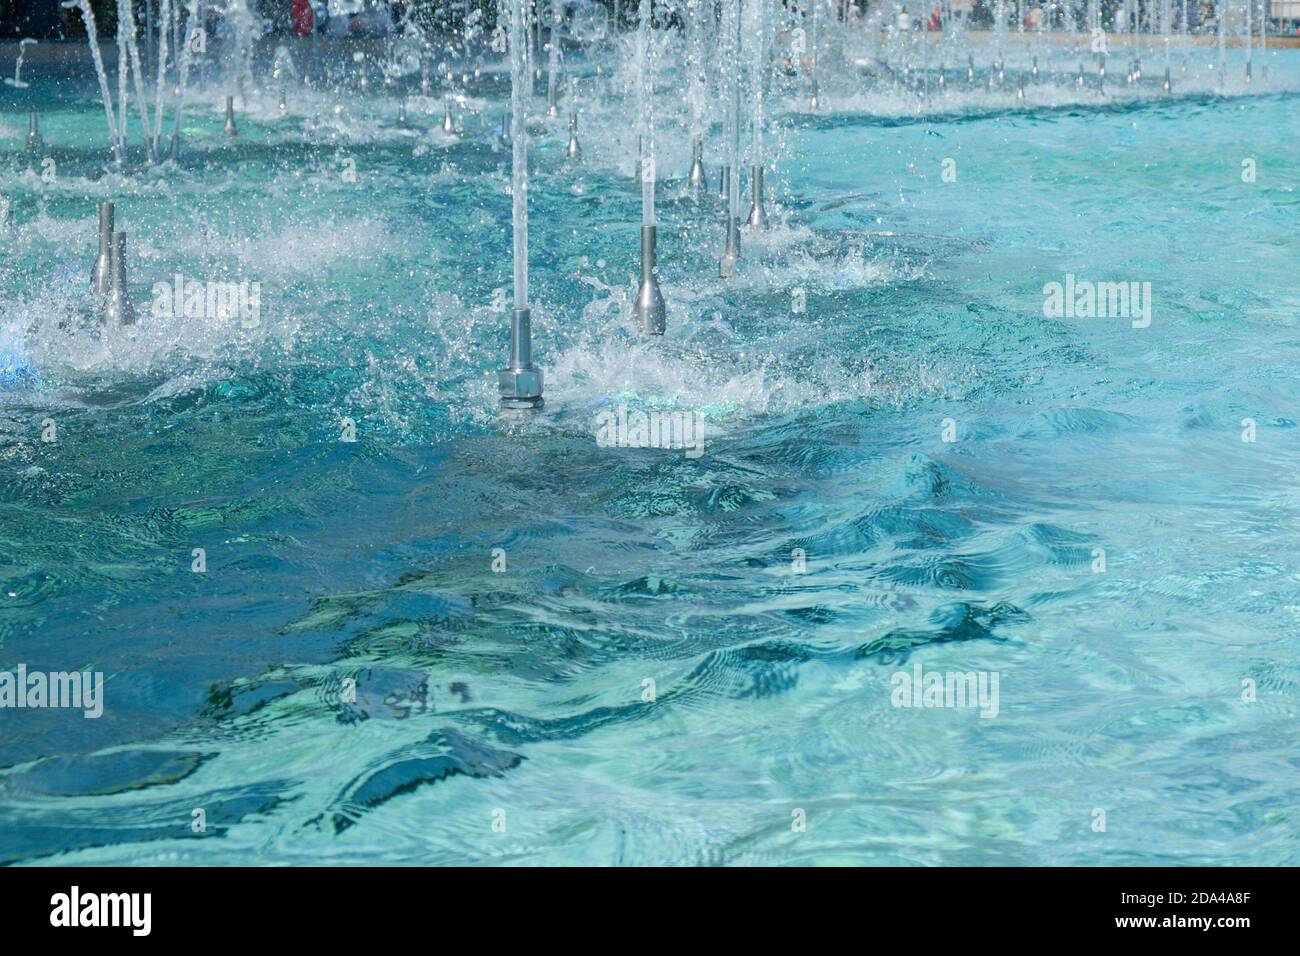 Smooth bore nozzles for foam jet water stream effect with splashes. Ripple and reflection on turquoise water surface of city fountain. Urban water fea Stock Photo